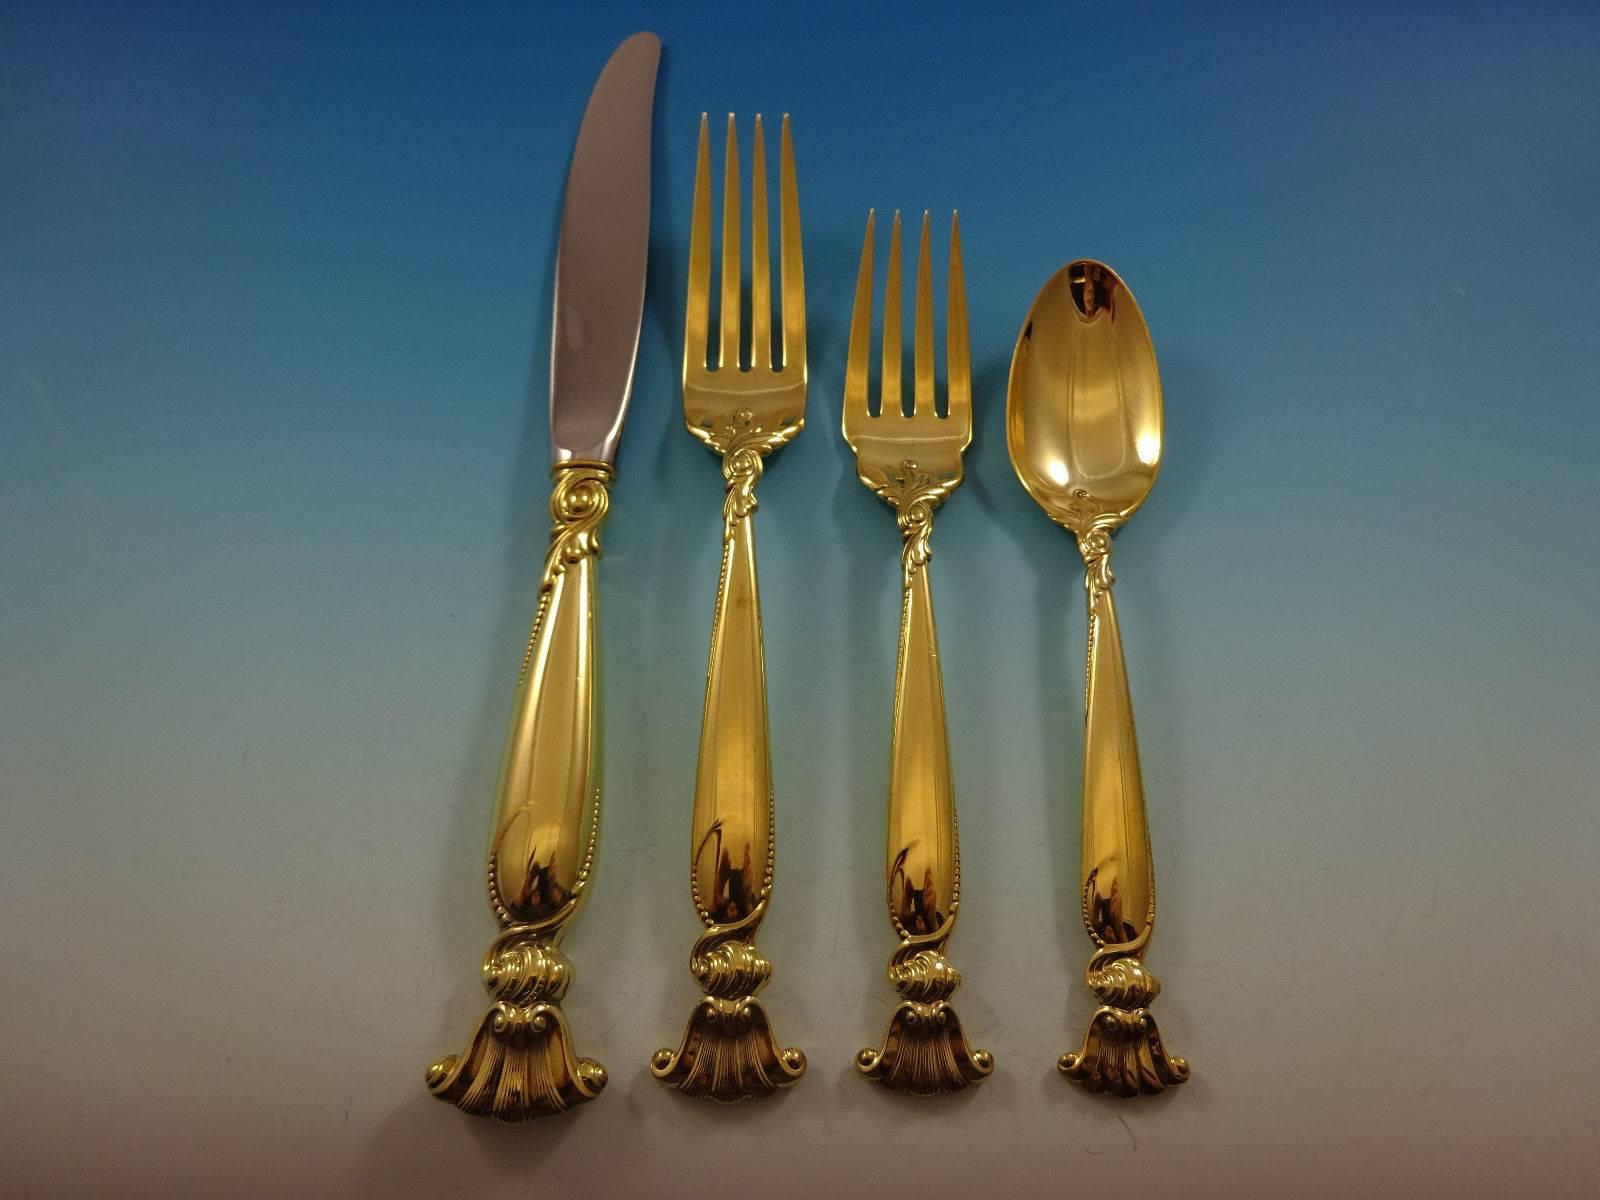 Fabulous Romance of the Sea Gold by Wallace Sterling Silver flatware set of 48 pieces. Gold flatware is on trend and makes a bold statement on your table. 

This set is vermeil (completely gold-washed) and includes:

12 Kknives, 9